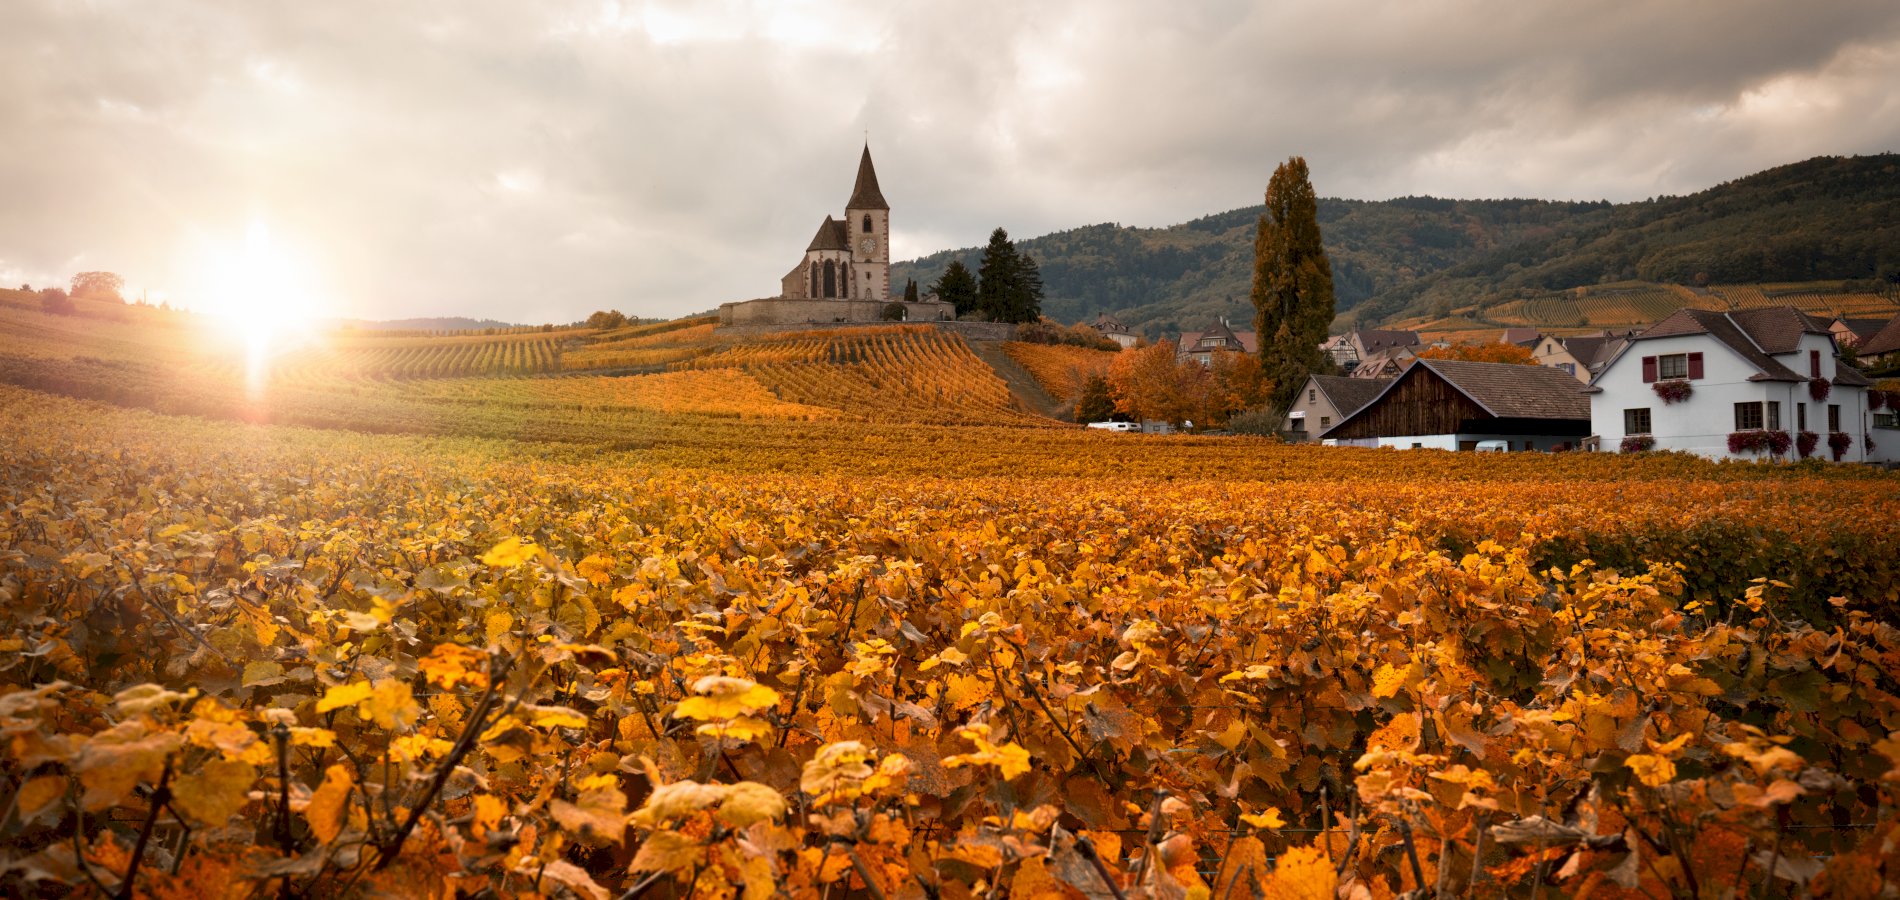 Ophorus Tours - Alsace Wine Tour Shared Half Day Trip From Strasbourg